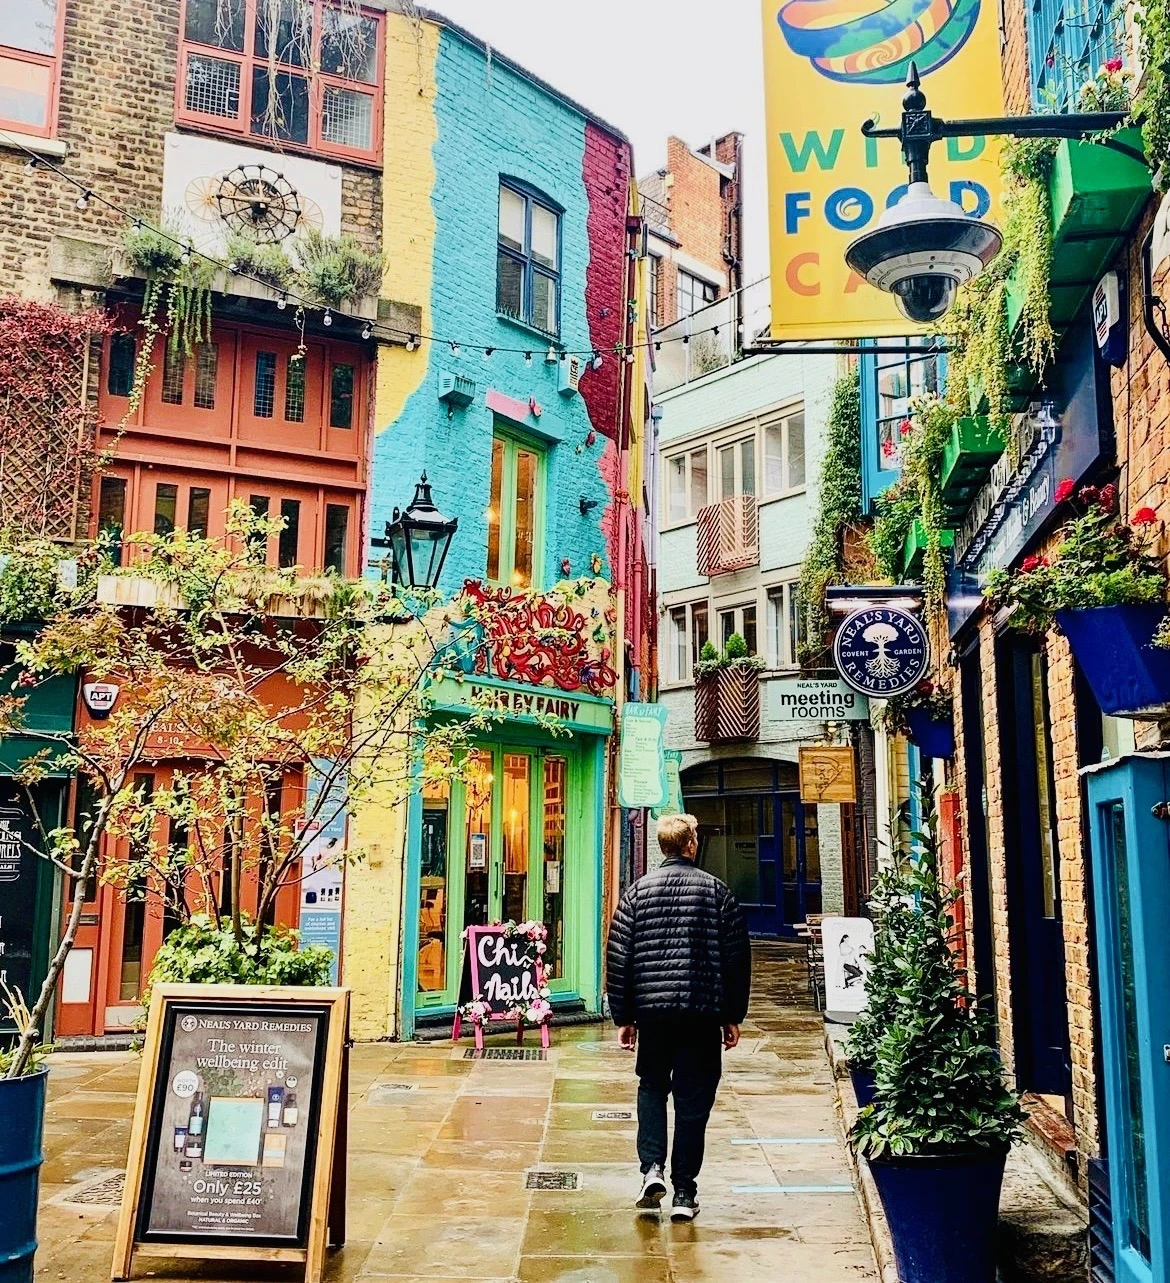 neals yard in covent garden is incredible when you visit london